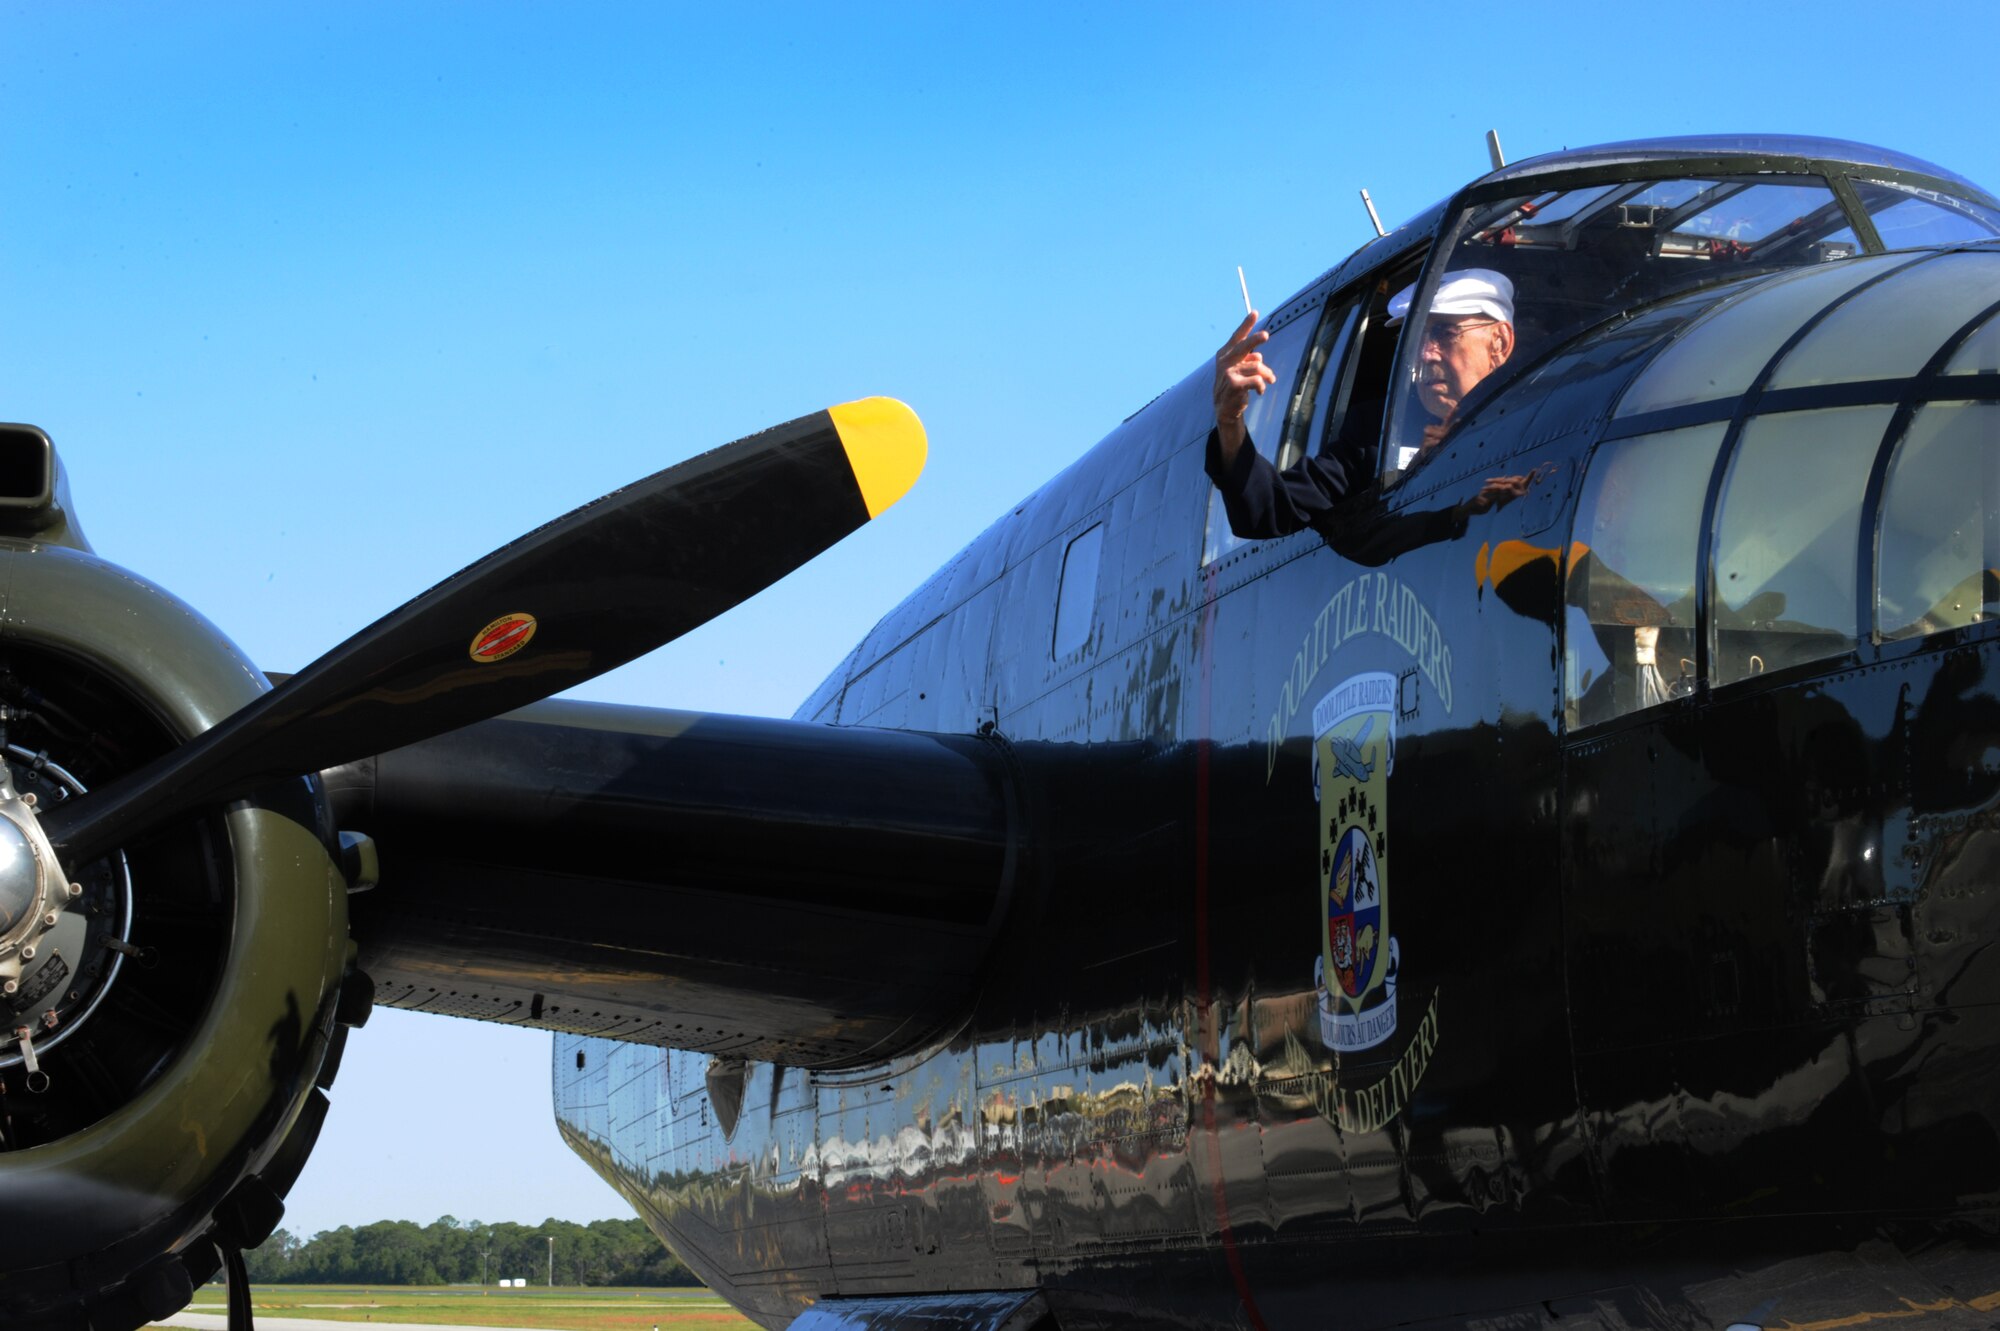 Ret. Lt. Col. Dick Cole, Doolittle Raider co-pilot crew 1, signals the start of engine 2 on a B-25 named "Special Delivery", April 20, 2013. (U.S. Air Force Photo by Senior Airman Carlin Leslie)